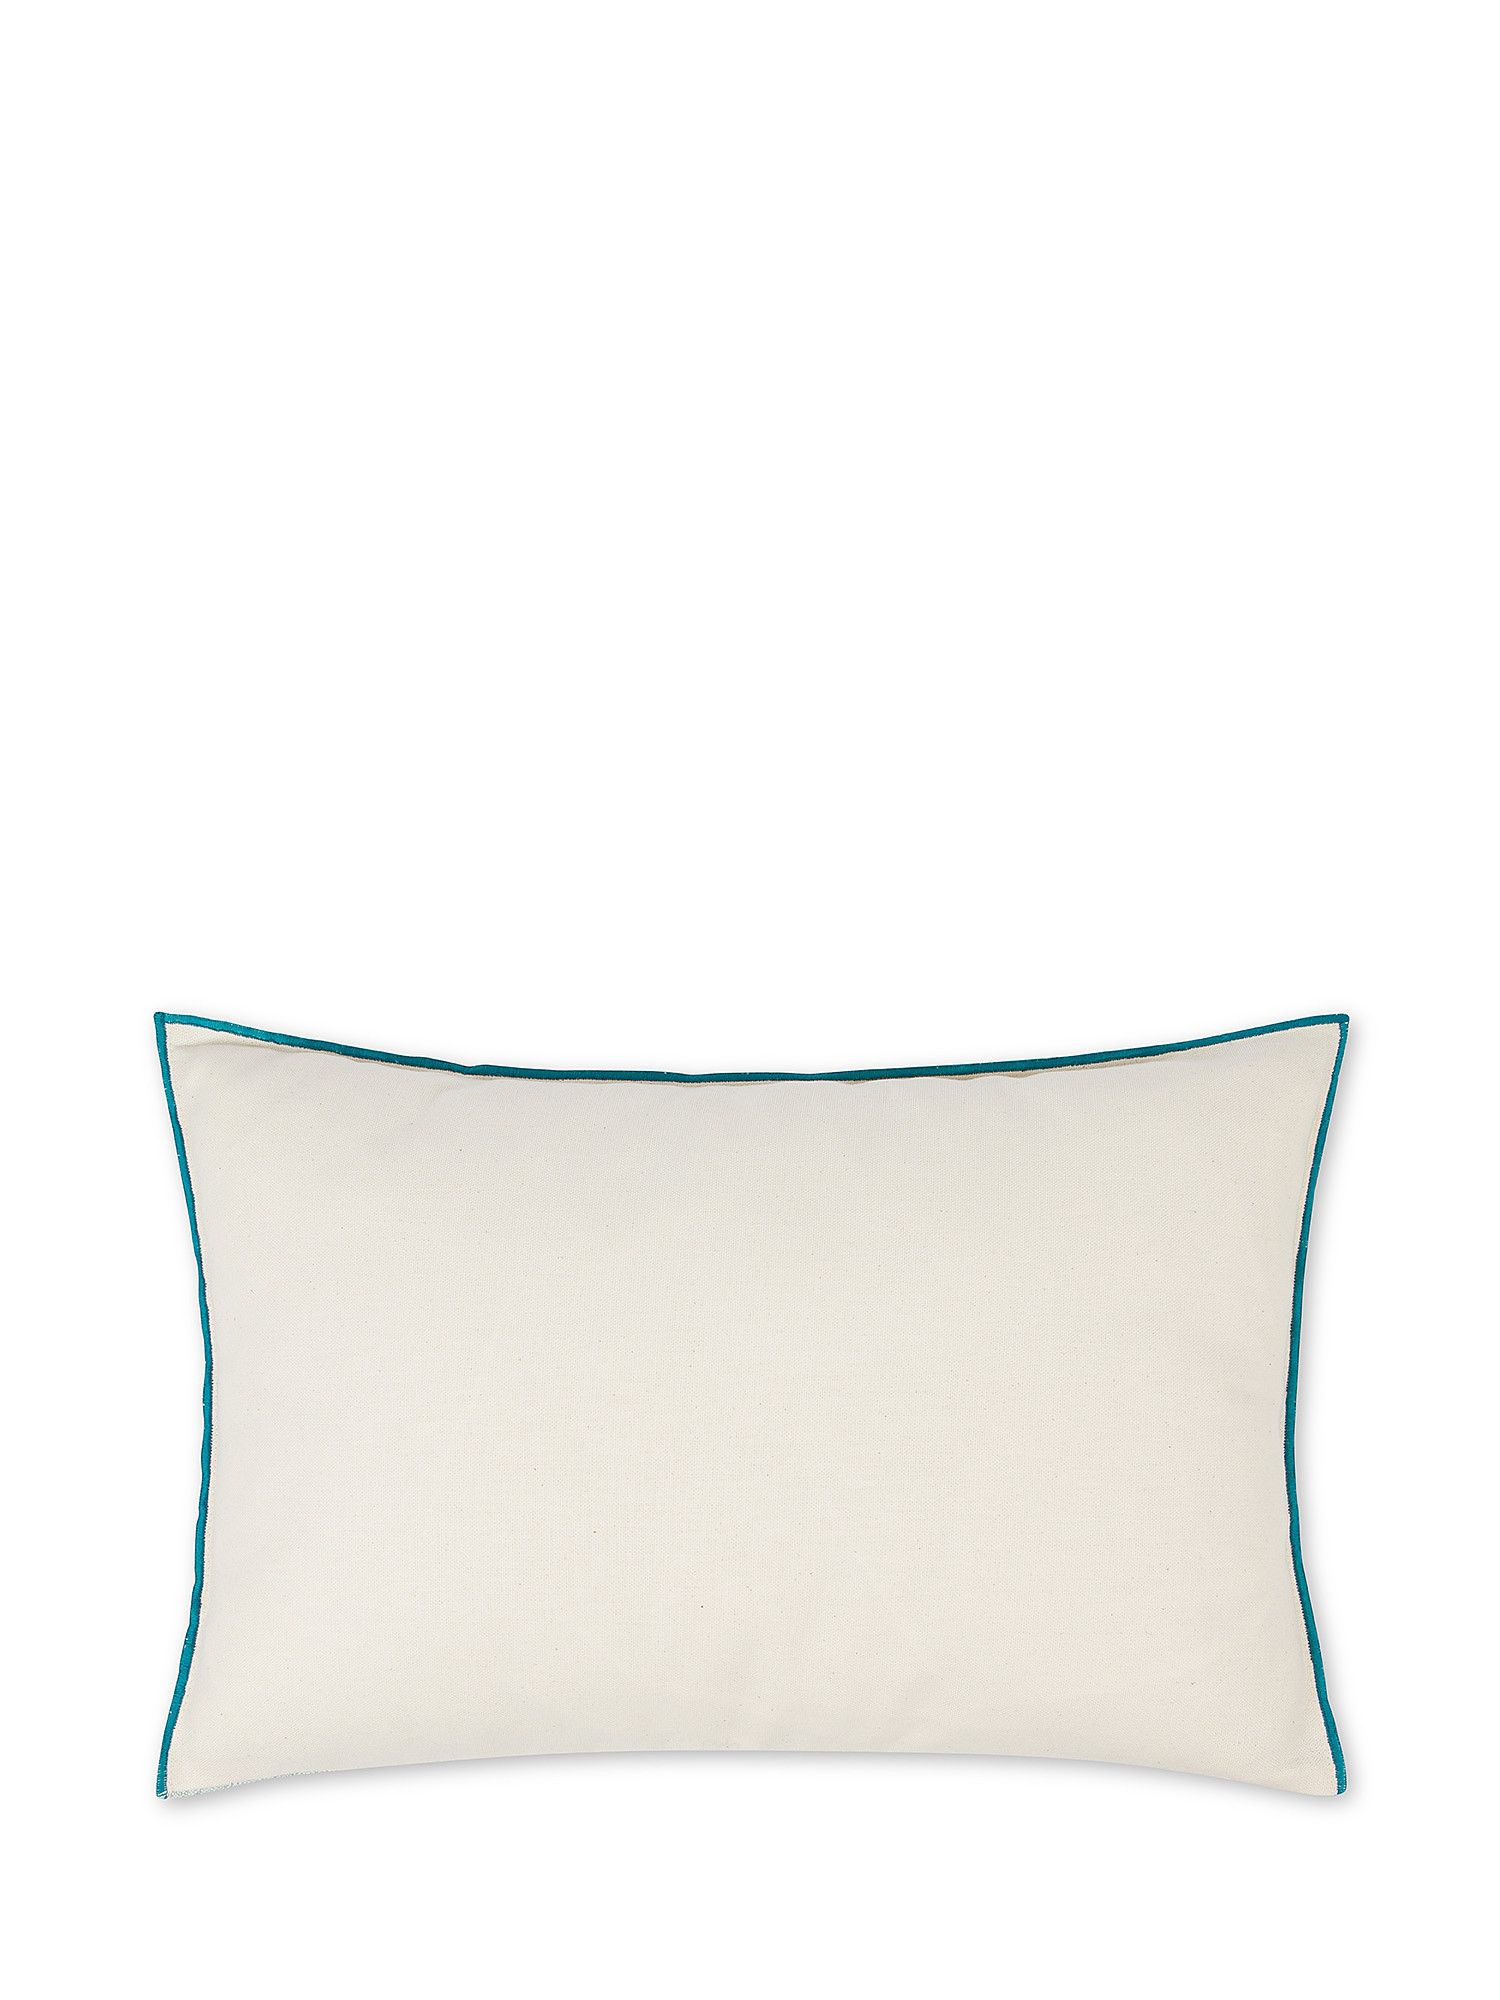 35x55 cm striped patterned cushion in recycled cotton, Teal, large image number 1